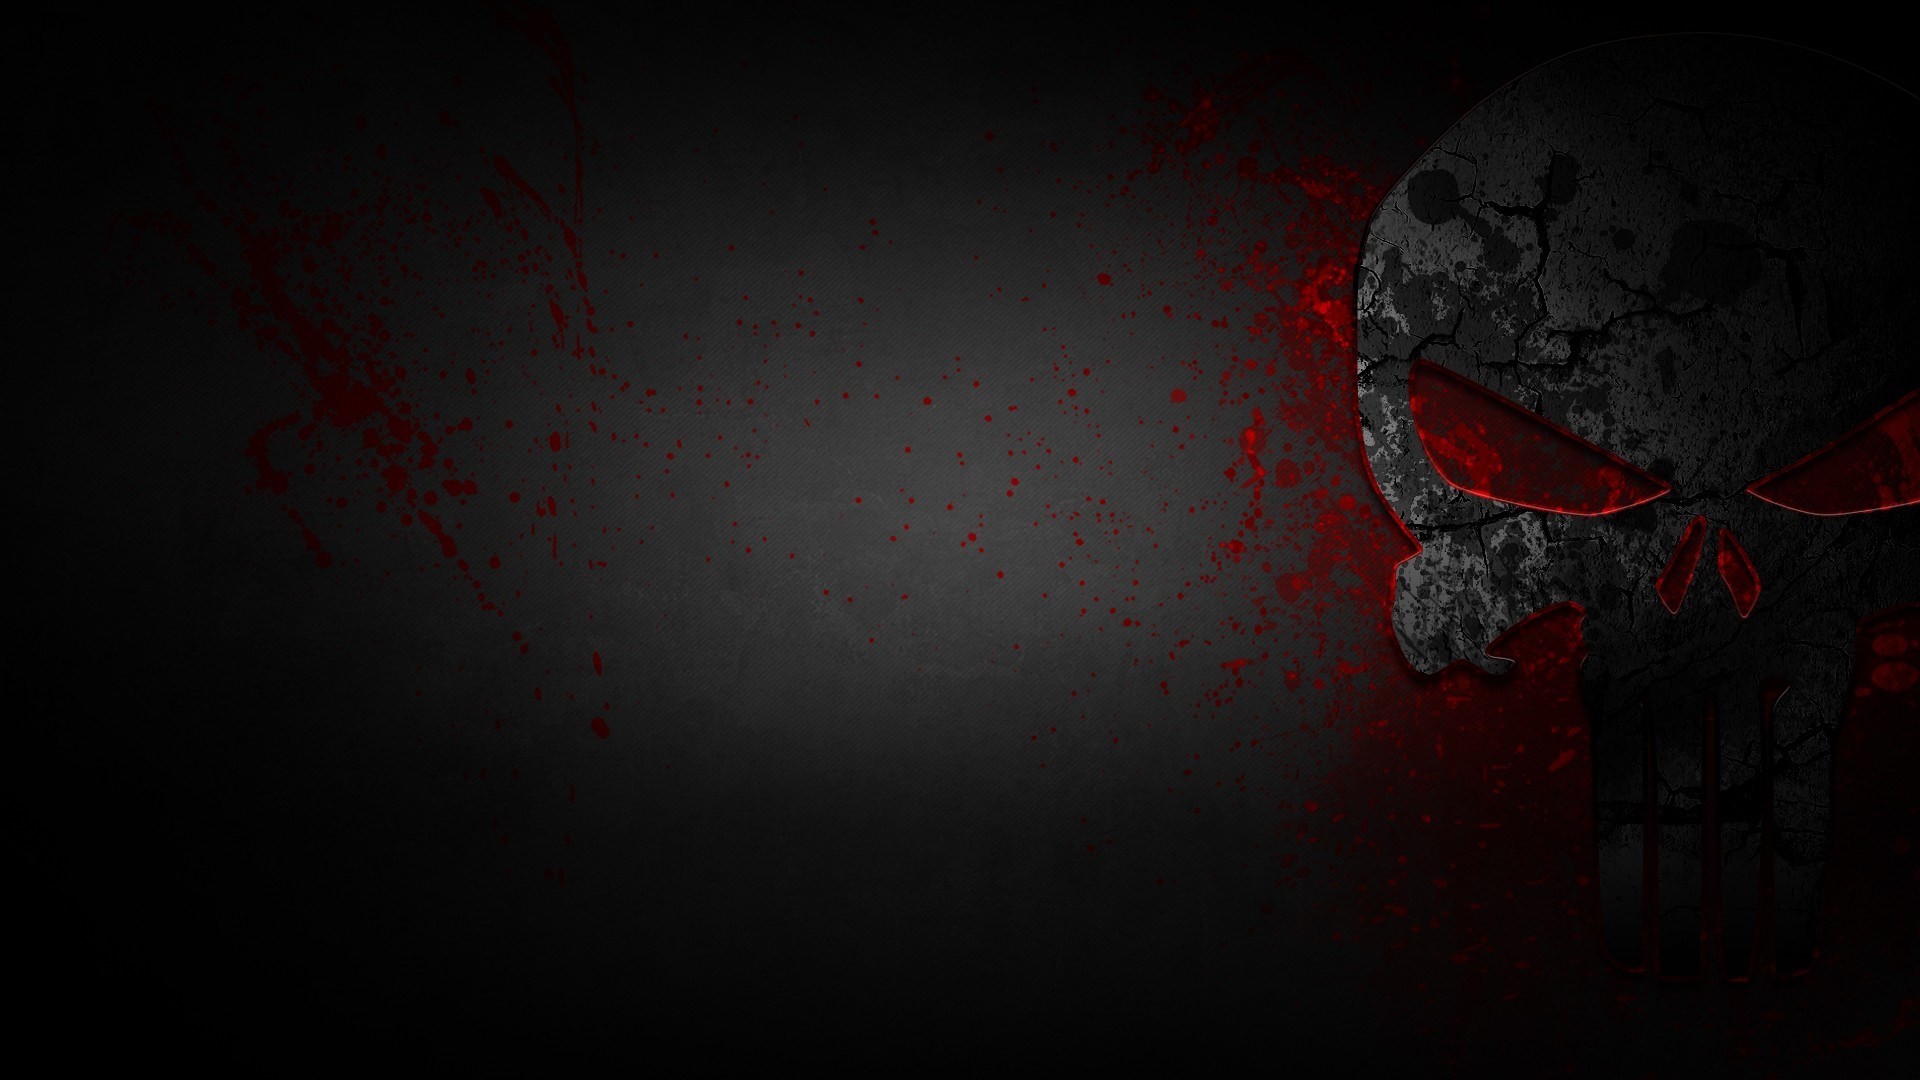 1920x1080 Punisher HD Wallpapers/Backgrounds For Free Download, BsnSCB 1920Ã1080 Punisher  Backgrounds (